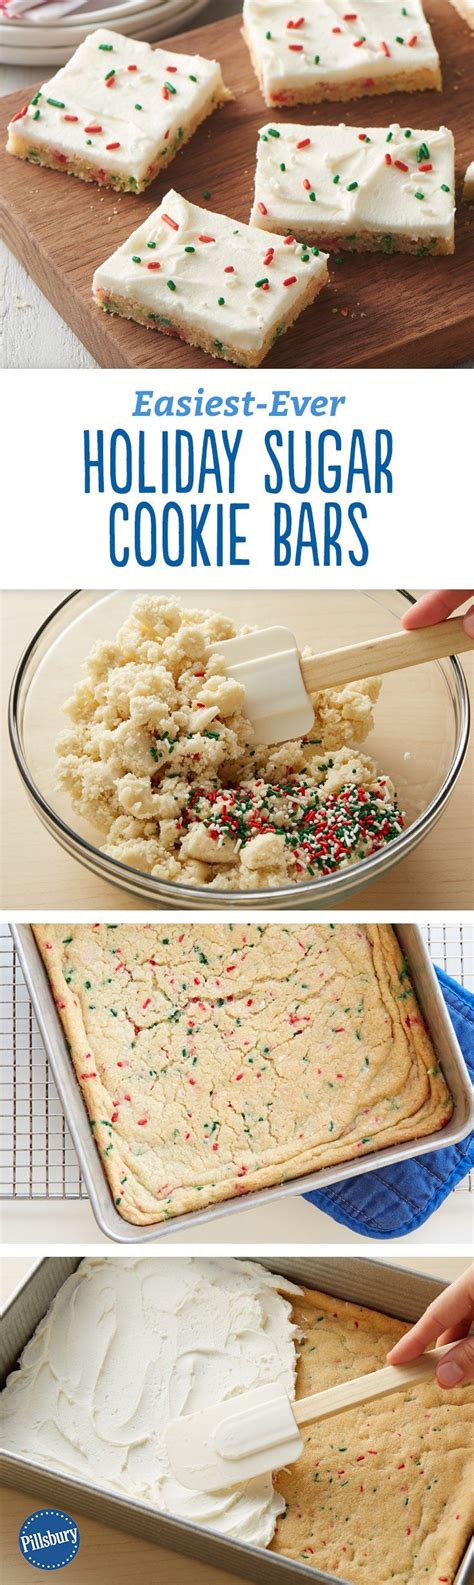 These are baked in a mini muffin pan and.read more. Enjoy these festive, yummy bars made with Pillsbury®️️ ...